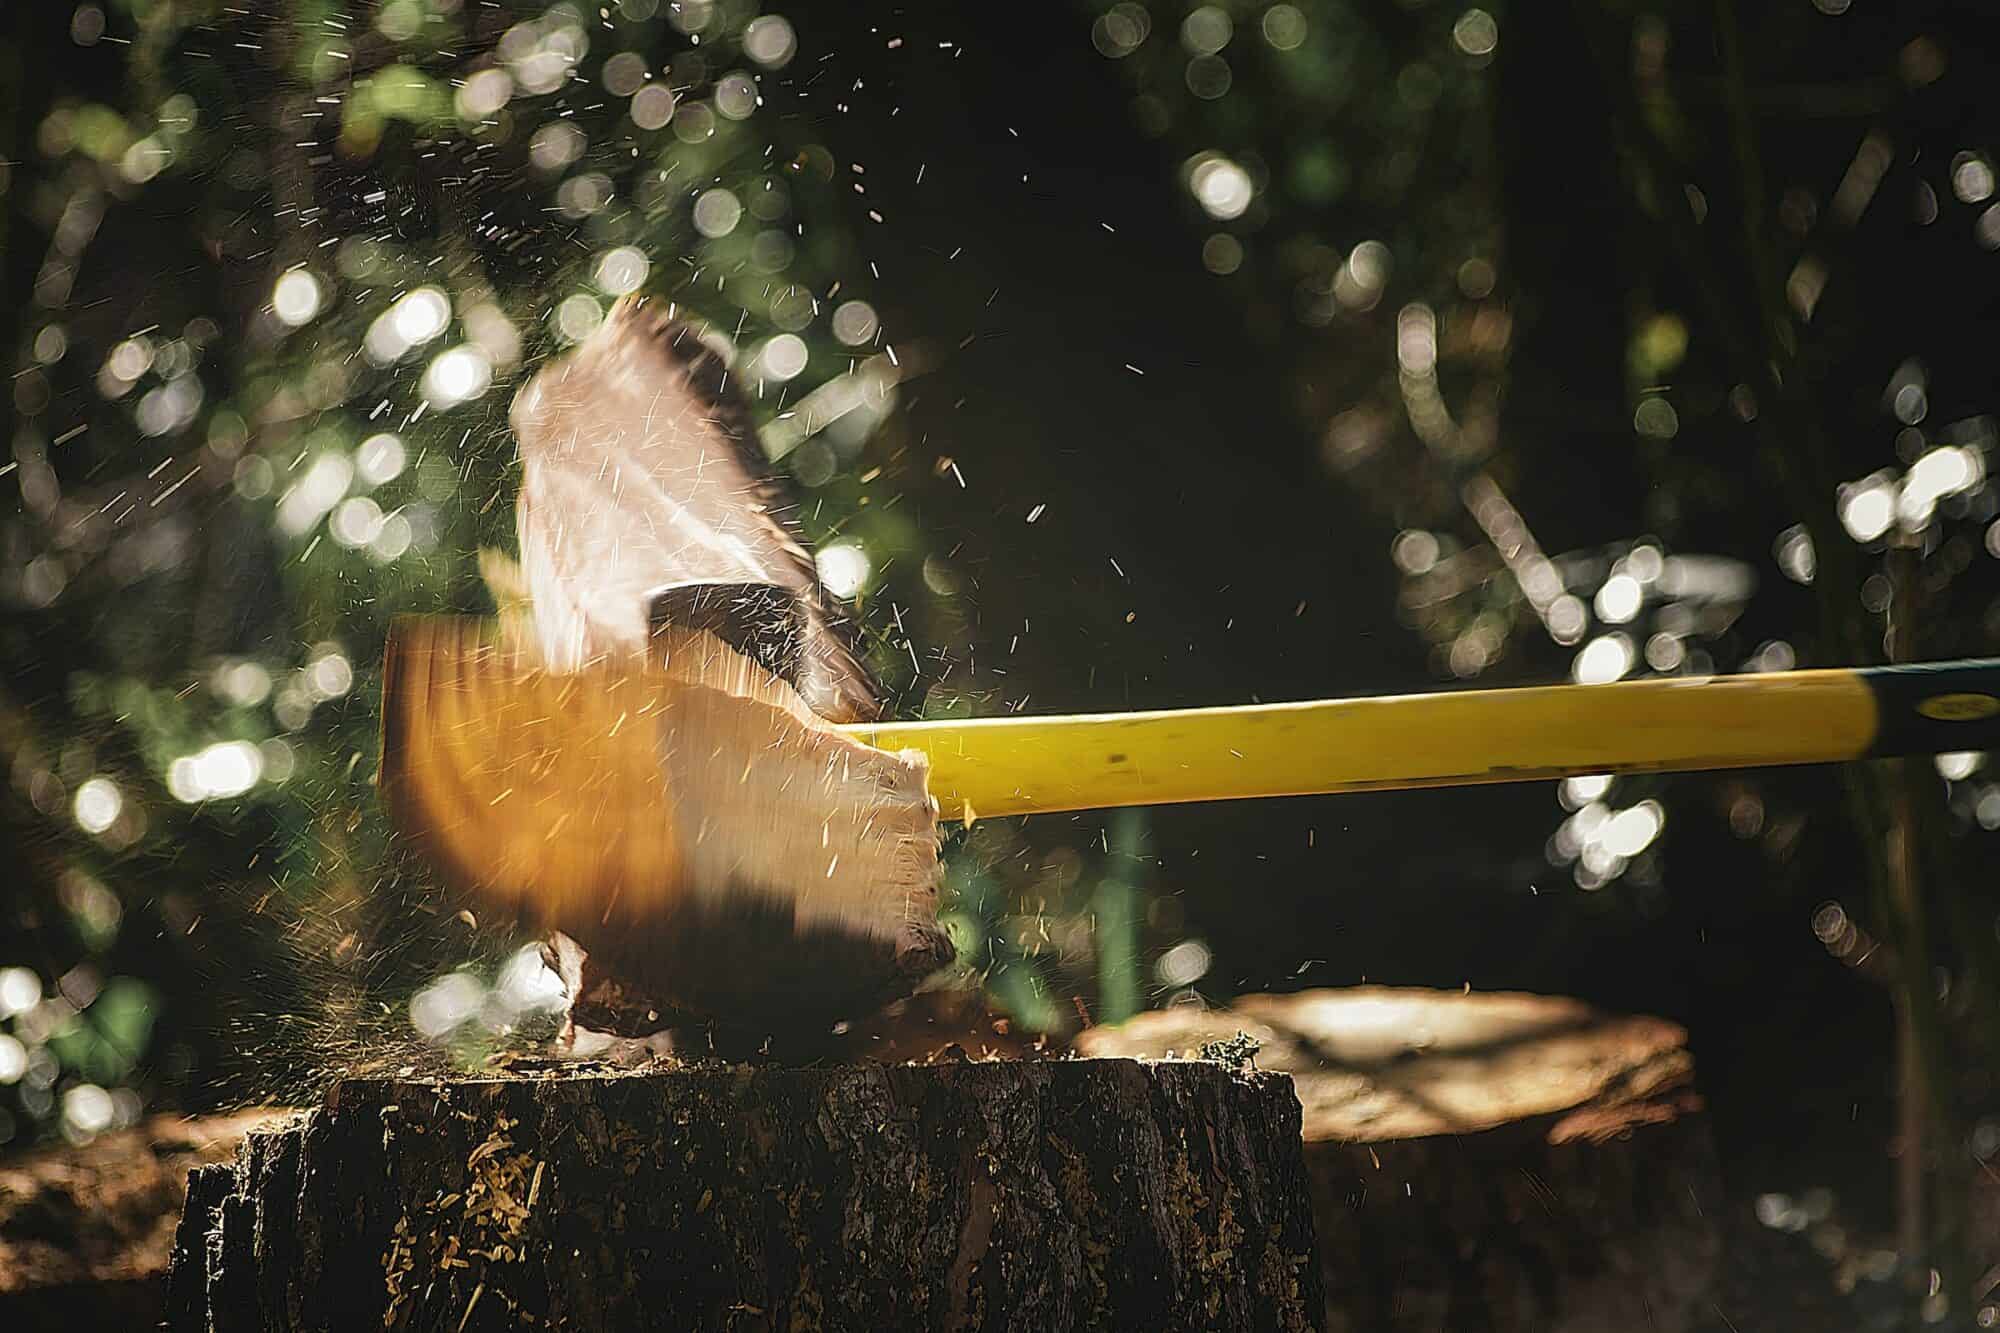 An axe cuts a block of wood in two on a tree stump.